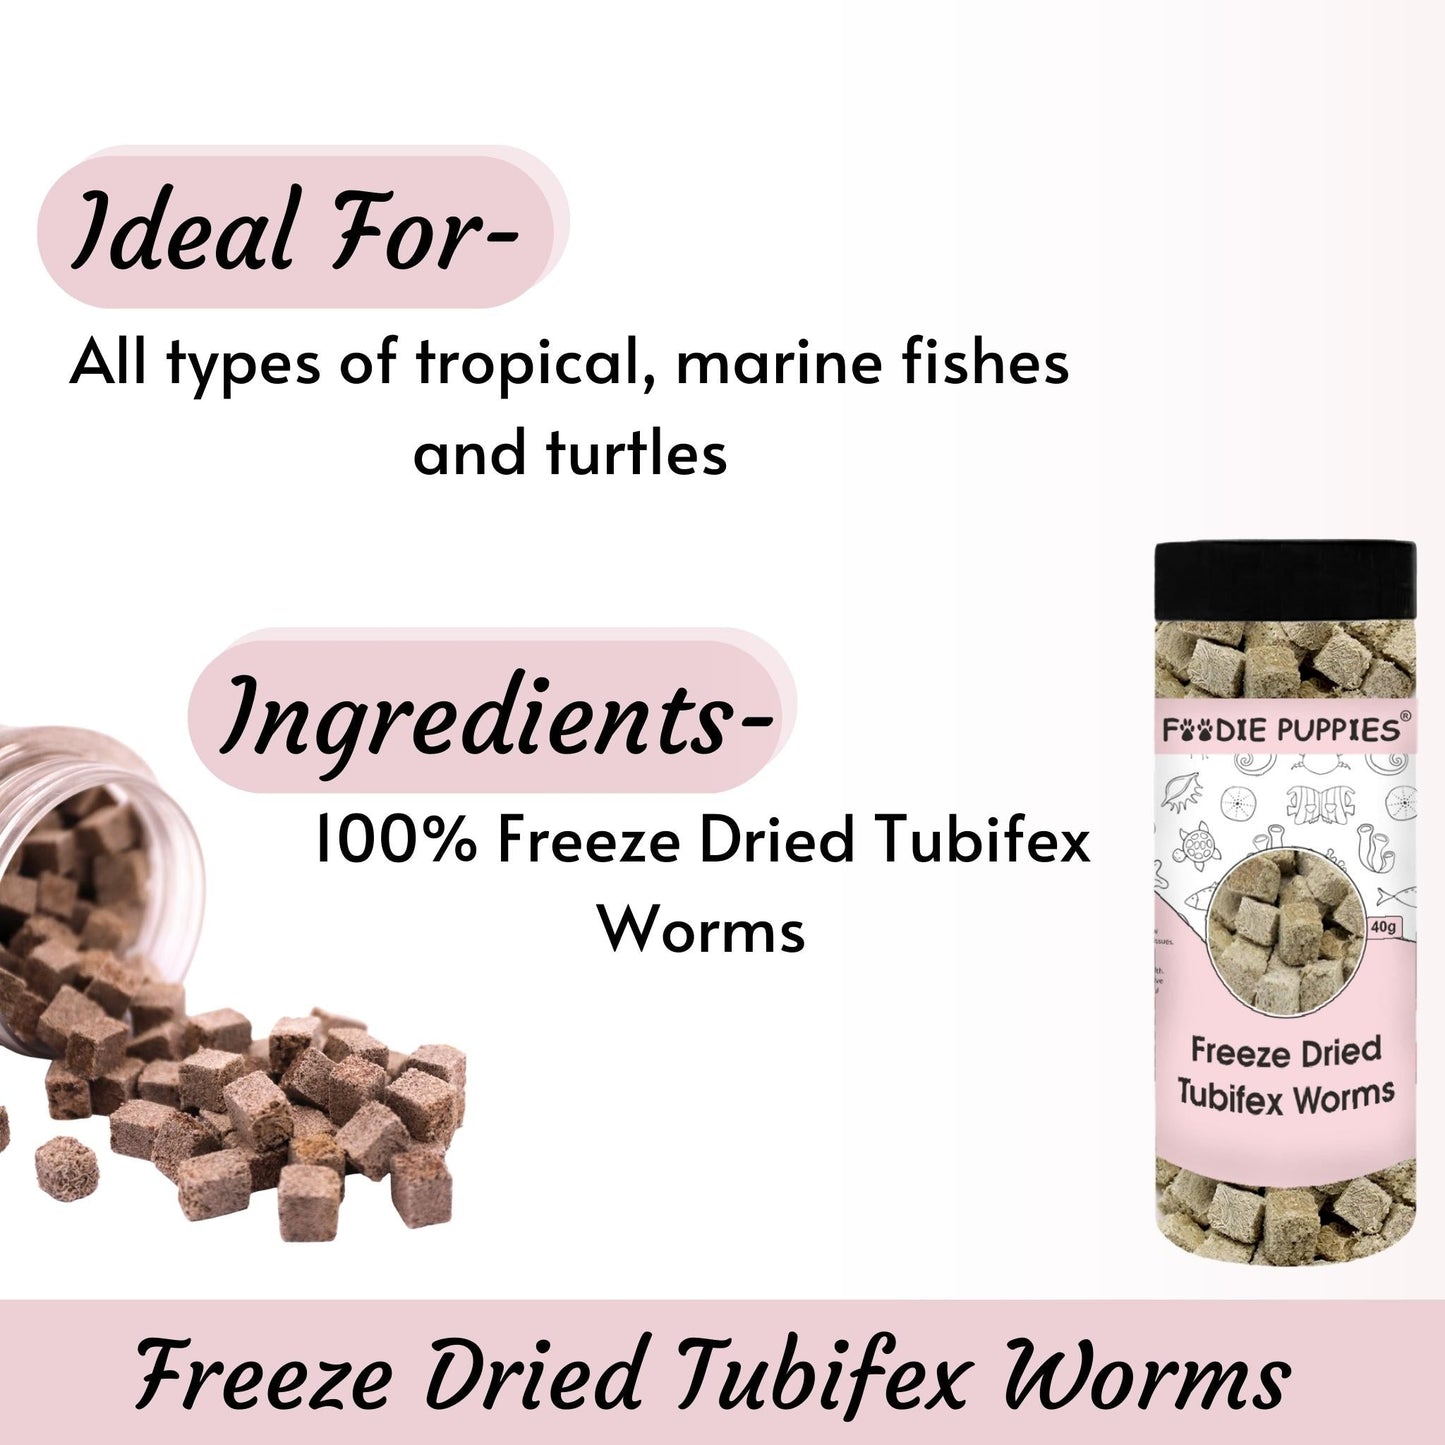 Foodie Puppies Freeze Dried Tubifex Worms Fish Food - 40gm, Pack of 3